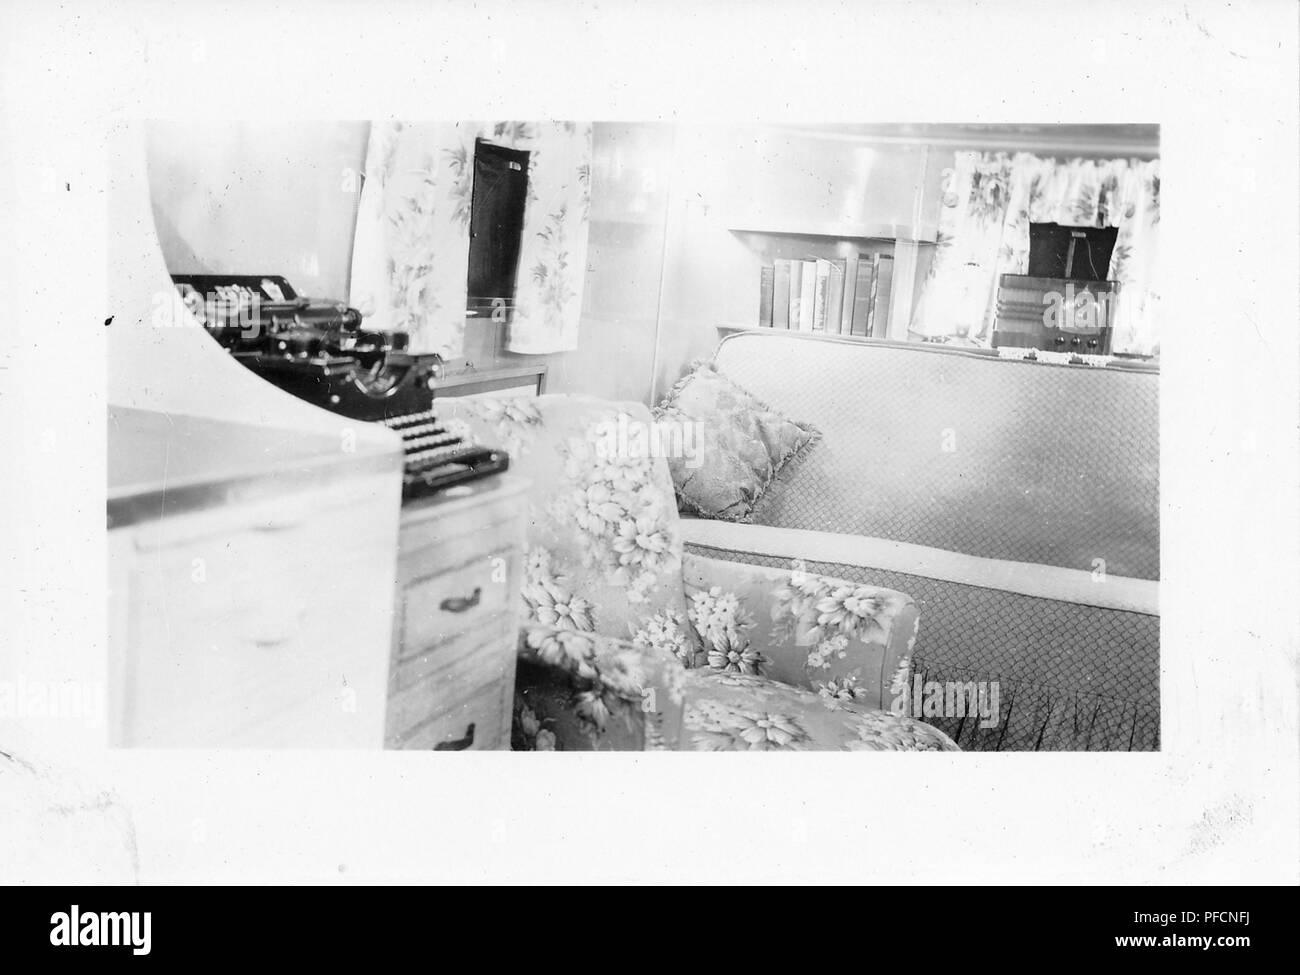 Black and white photograph, showing the cramped interior of a vintage caravan or trailer home, dominated by a black typewriter, floral easy chair, and chintz-covered sofa, with a small radio visible in the background, likely photographed in Ohio in the decade following World War II, 1950. () Stock Photo